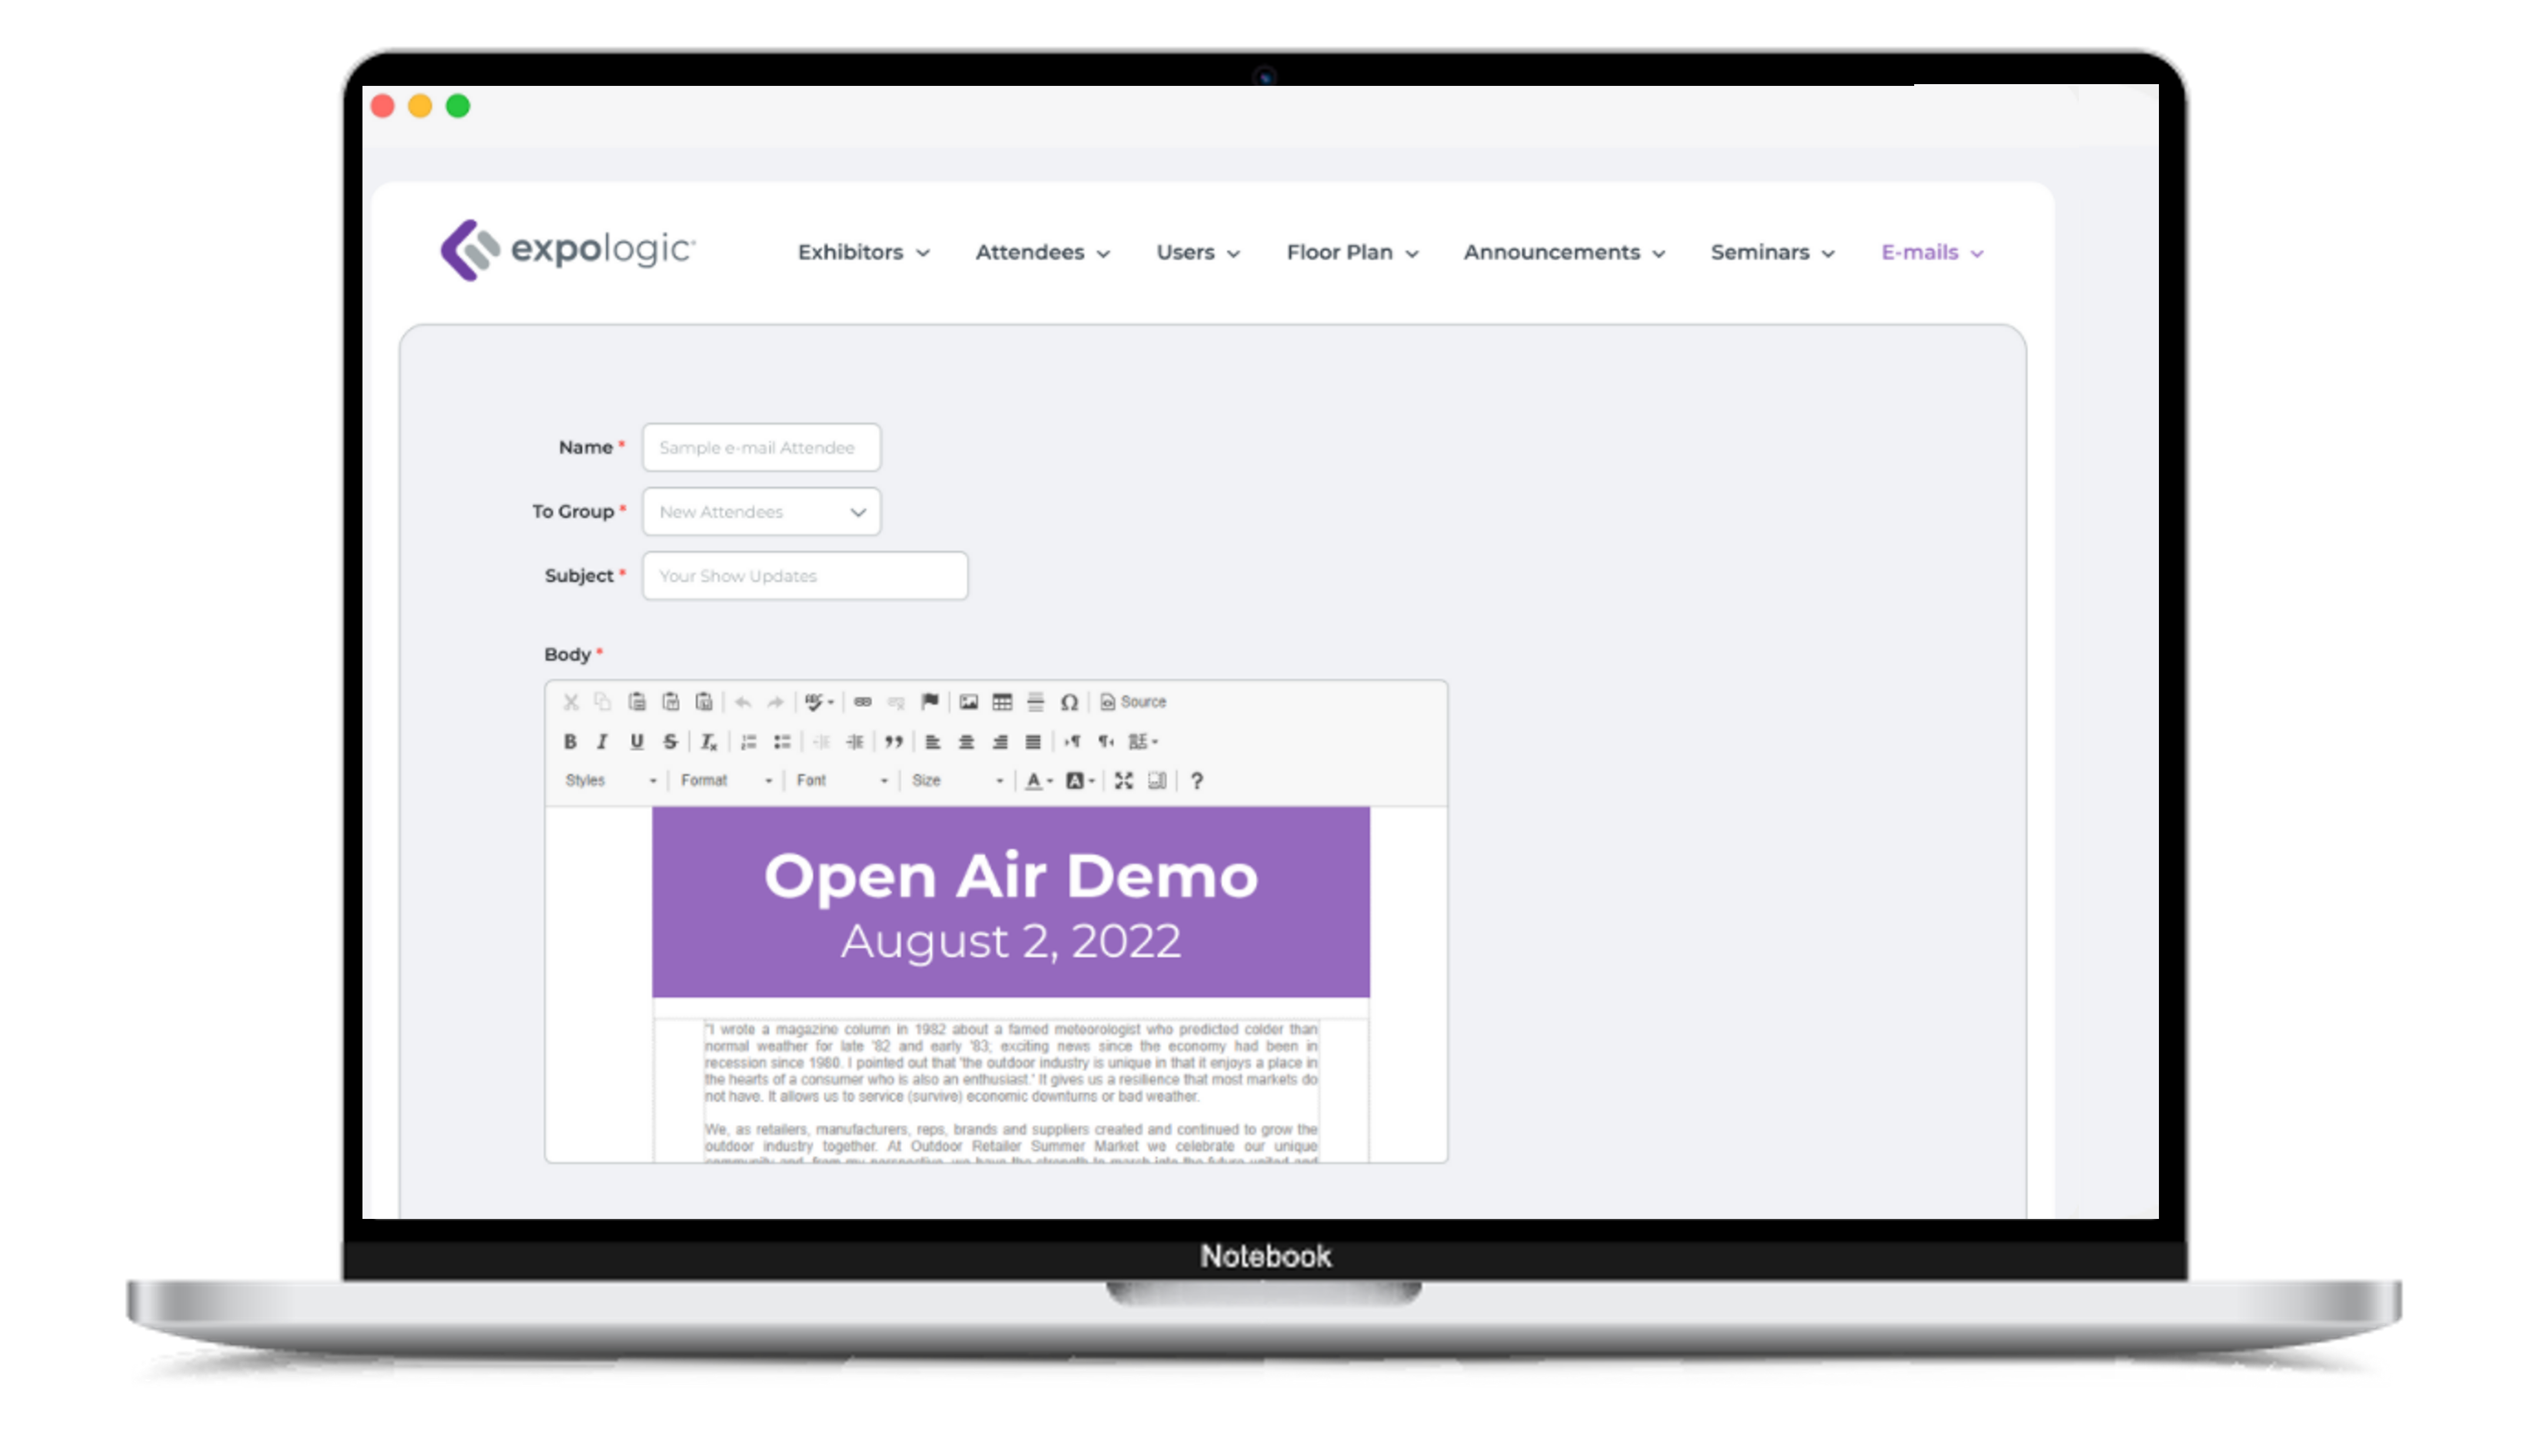 Our software, GoExpo, is a powerful ecommerce platform for selling sponsorships. Easily sell web banners, upgrade directory listings, create e-newsletters and advertise.